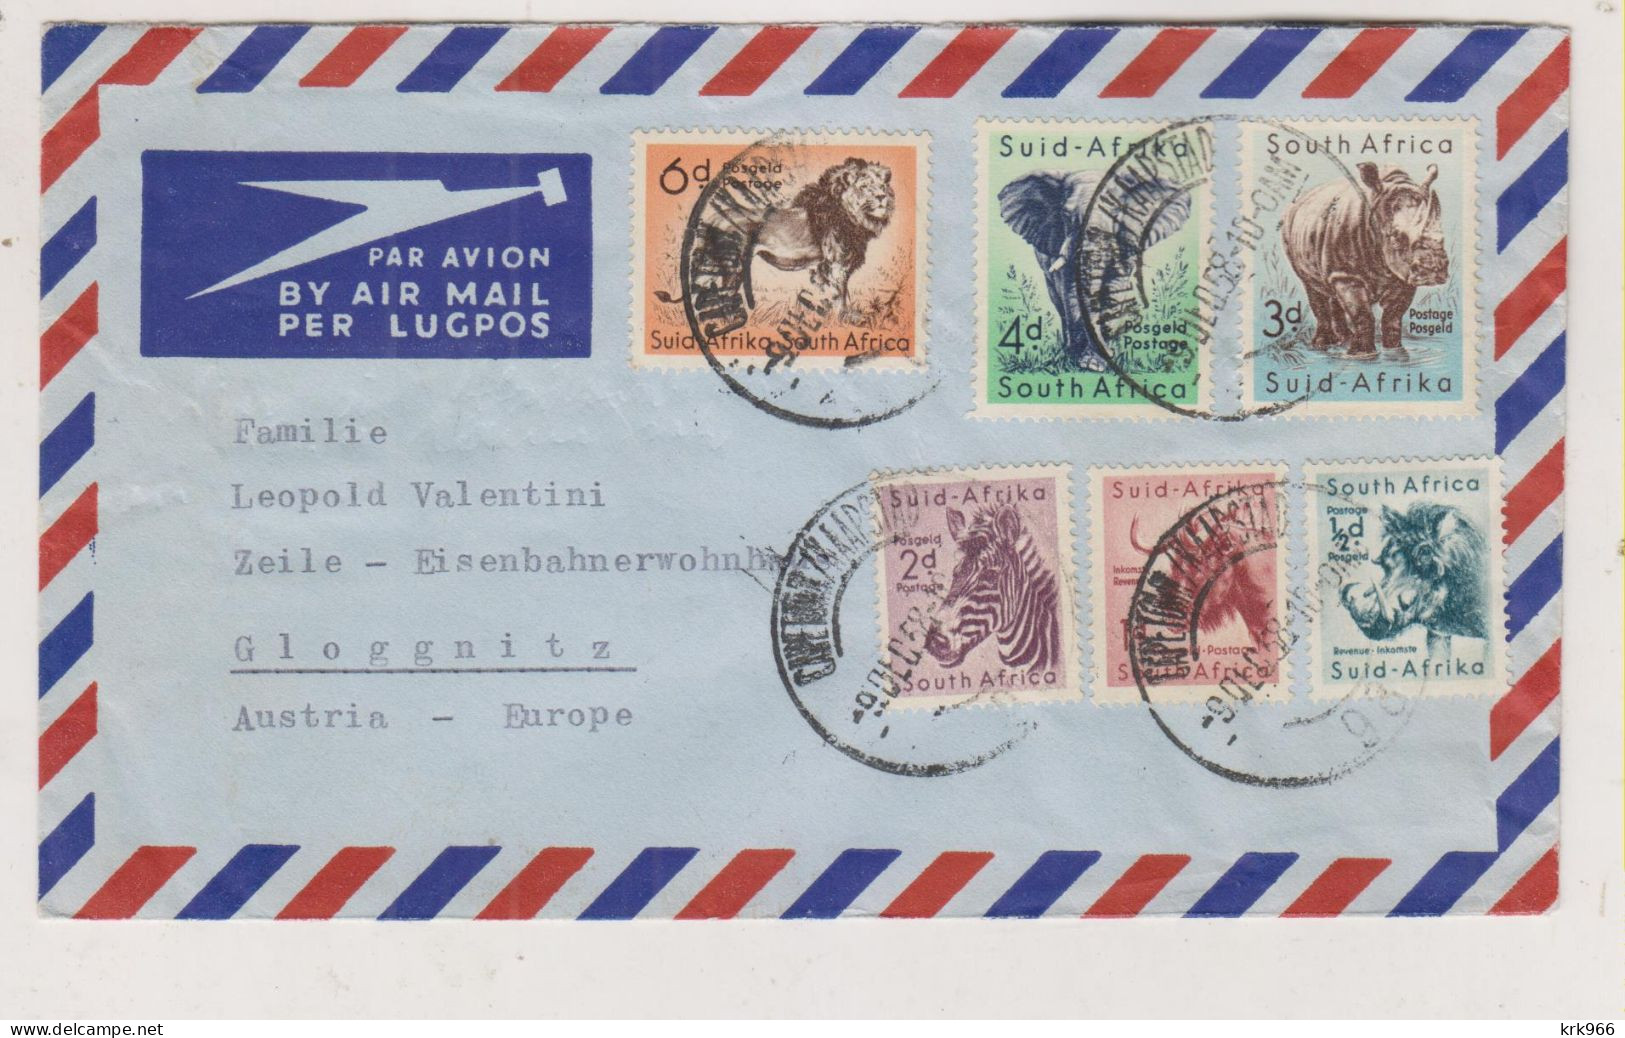 SOUTH AFRICA 1958 CAPE TOWN  Nice   Airmail Cover To Austria - Luchtpost